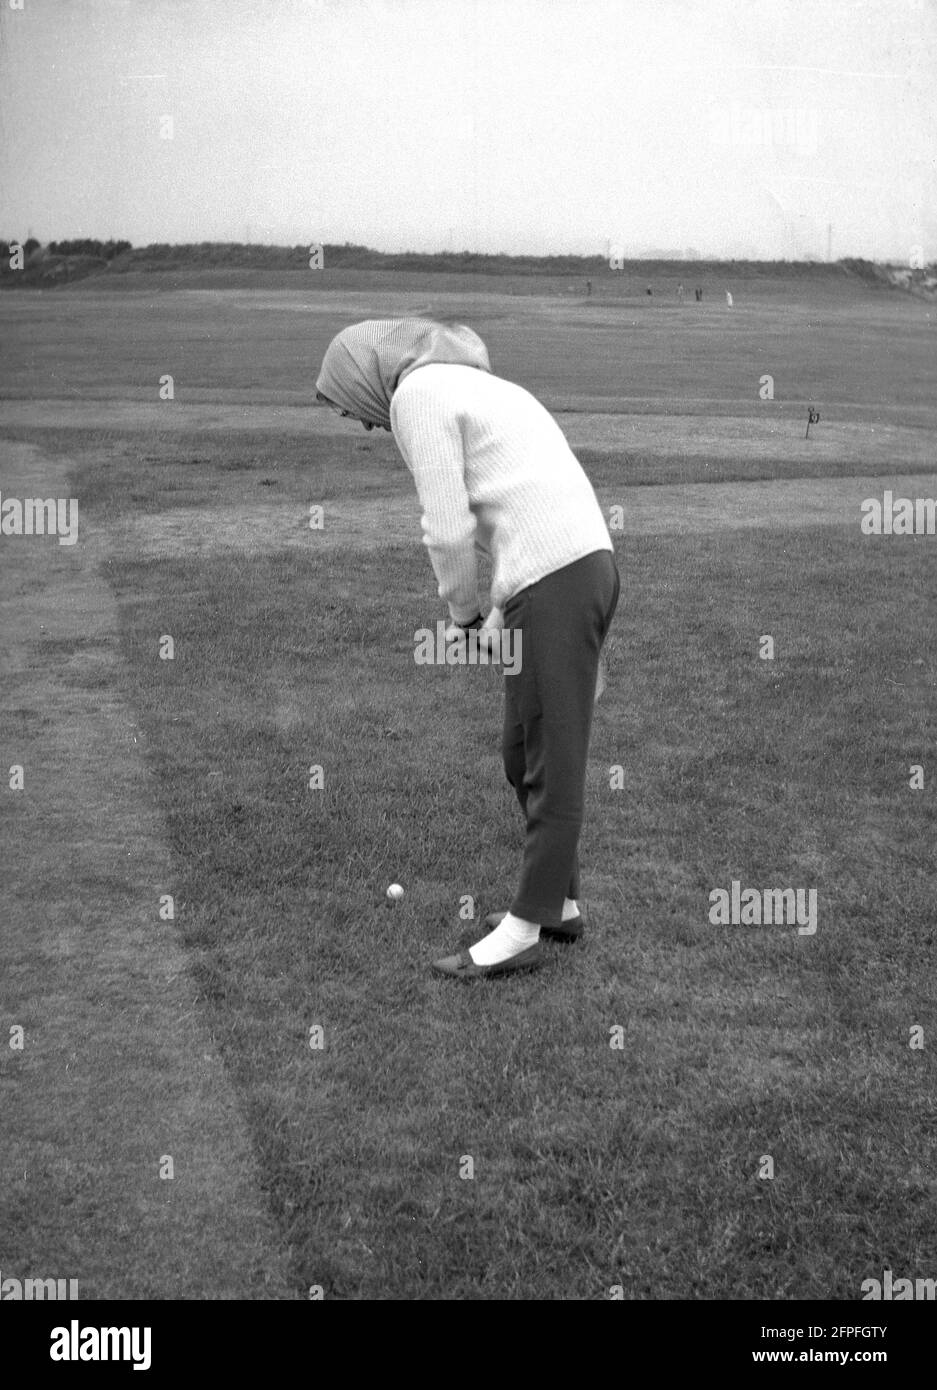 1962, historical, a lady in a headscarf playing golf on a seaside putting green or putting course at Littlehampton, West Sussex, England, UK. Stock Photo